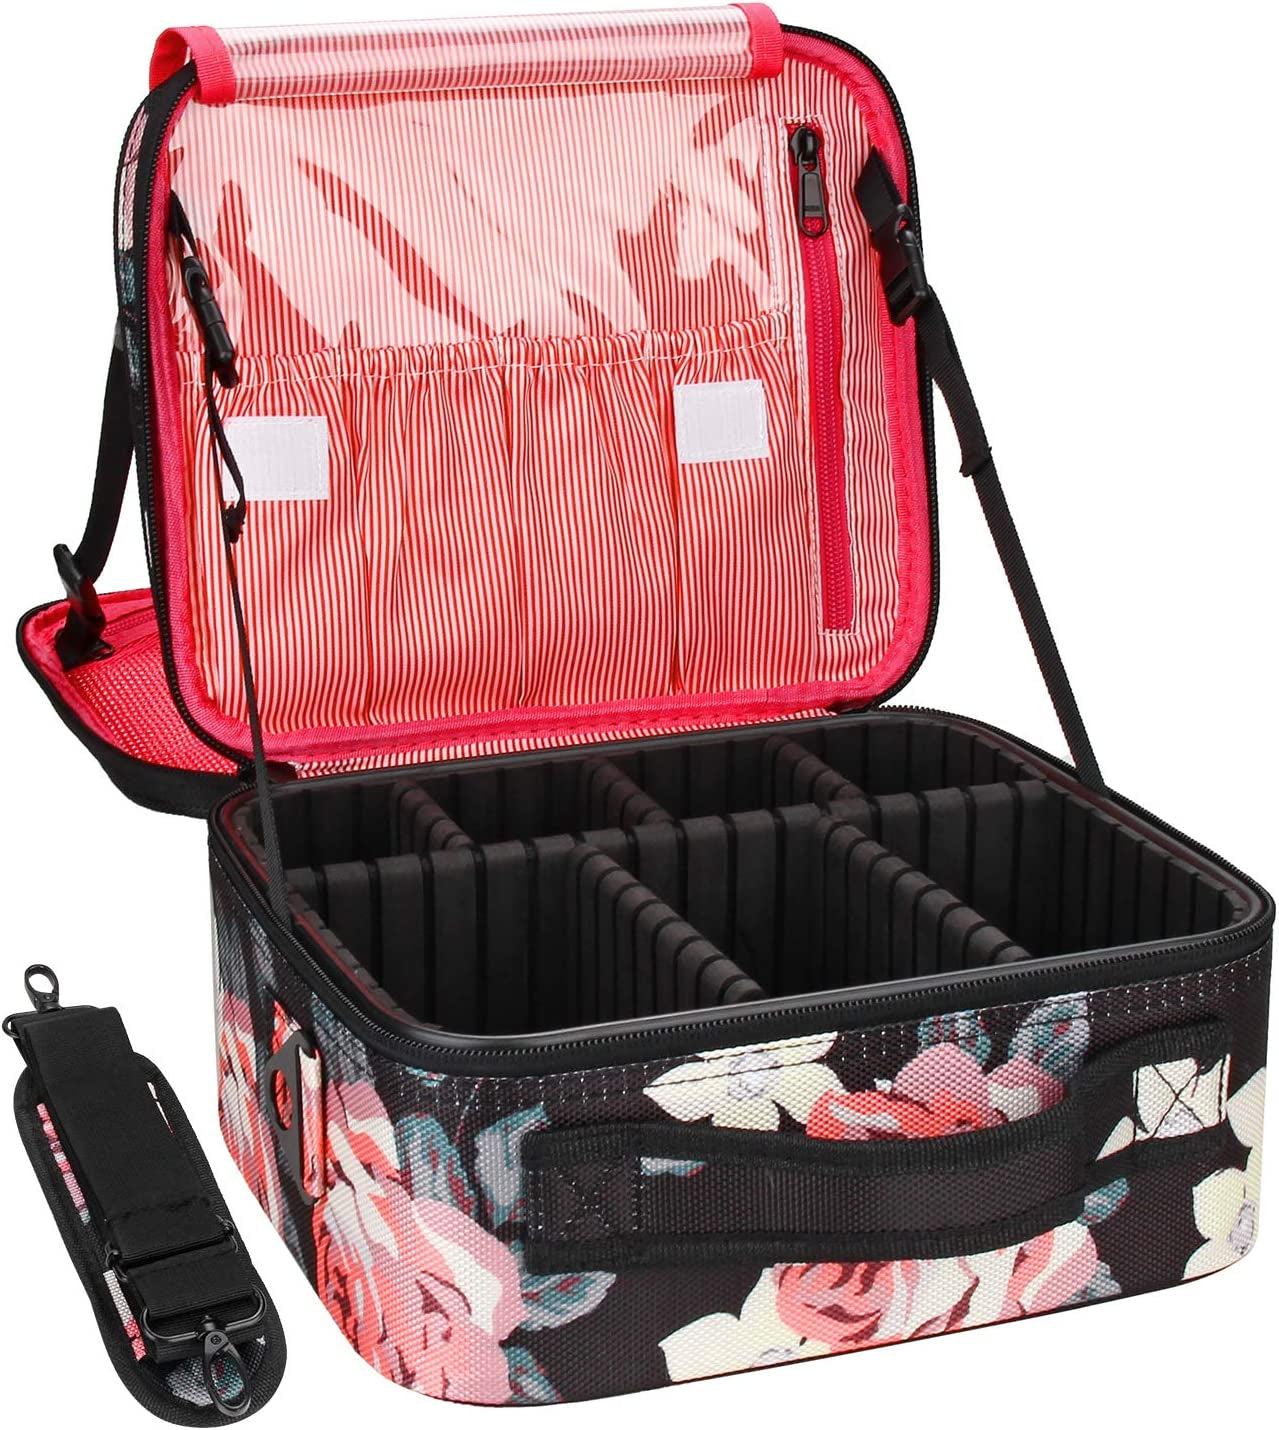 Relavel Travel Makeup Bag 2 Layer Heighten Makeup Train Case Cosmetic Storage and Organizer Box Portable Makeup Carrying Case with Shoulder Strap and Adjustable Dividers (Peony Pattern)